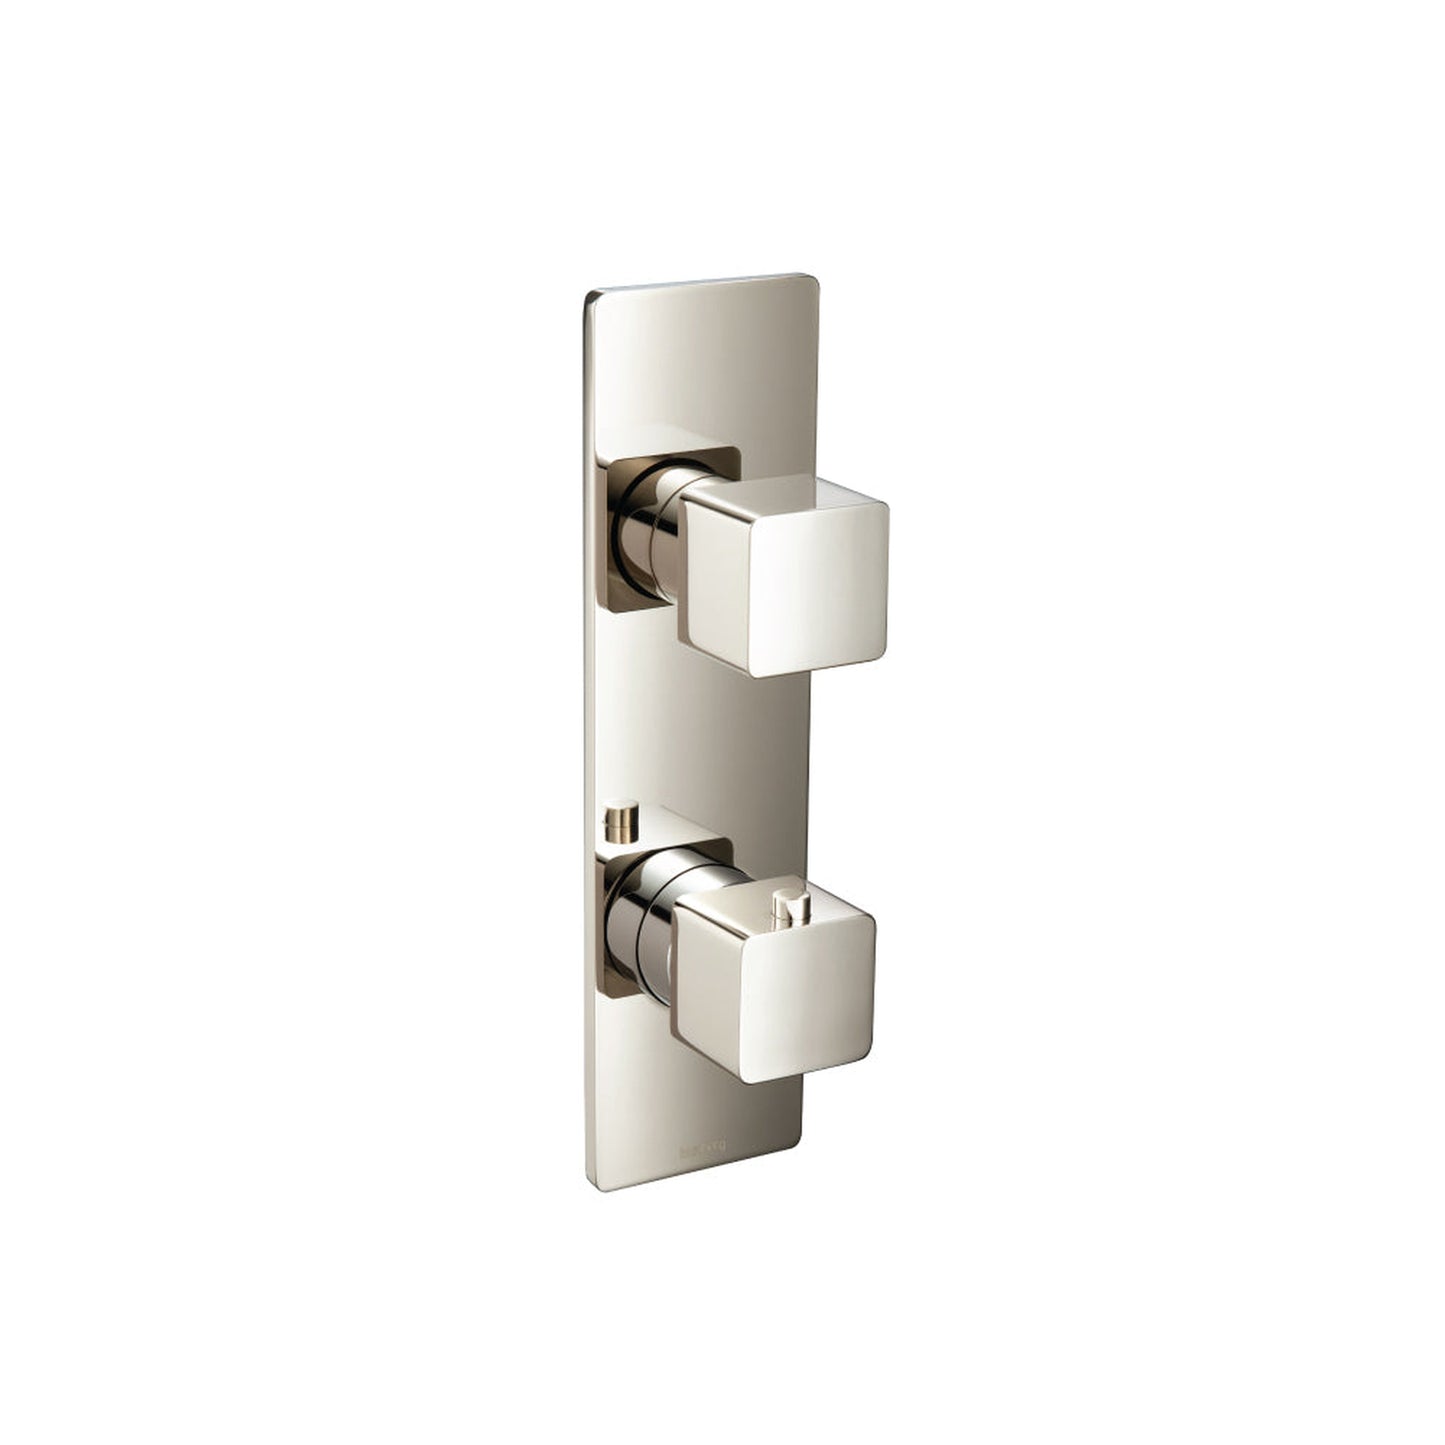 Isenberg Serie 196 3/4" Single Output Horizontal Thermostatic Shower Valve and Trim in Polished Nickel (196.2720PN)